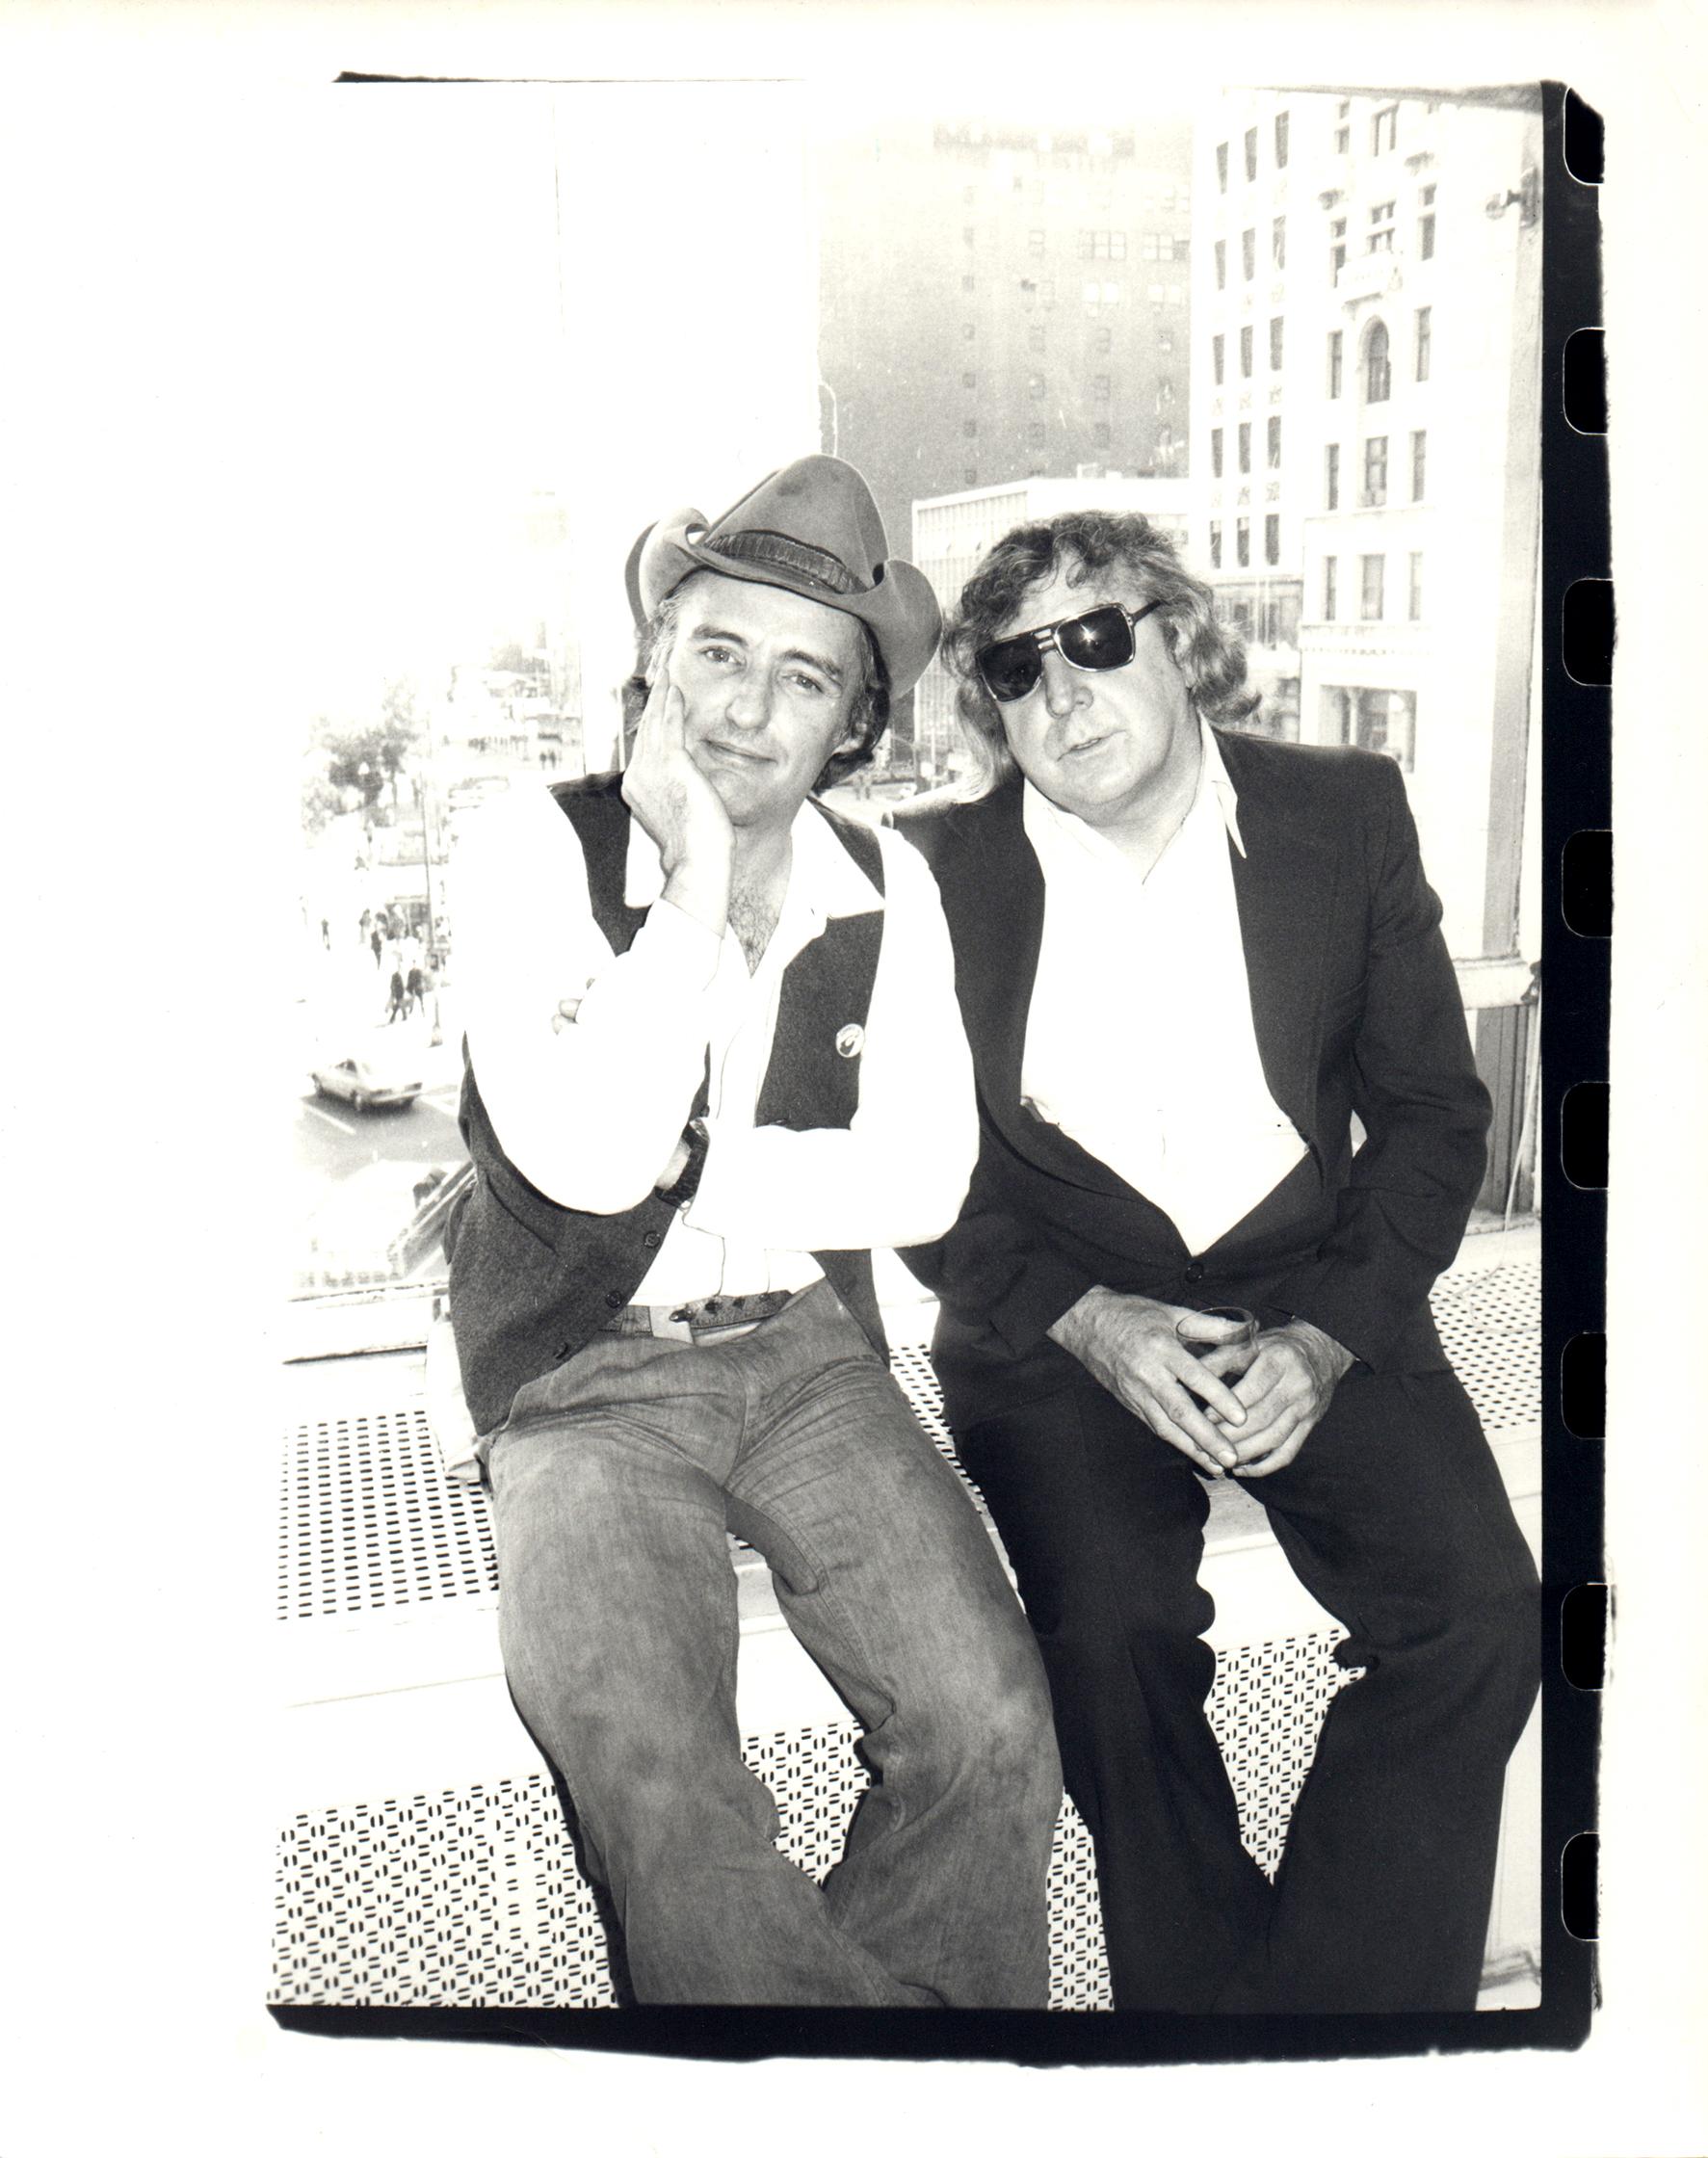 Andy Warhol Portrait Photograph - Dennis Hopper and Gerry Rothberg